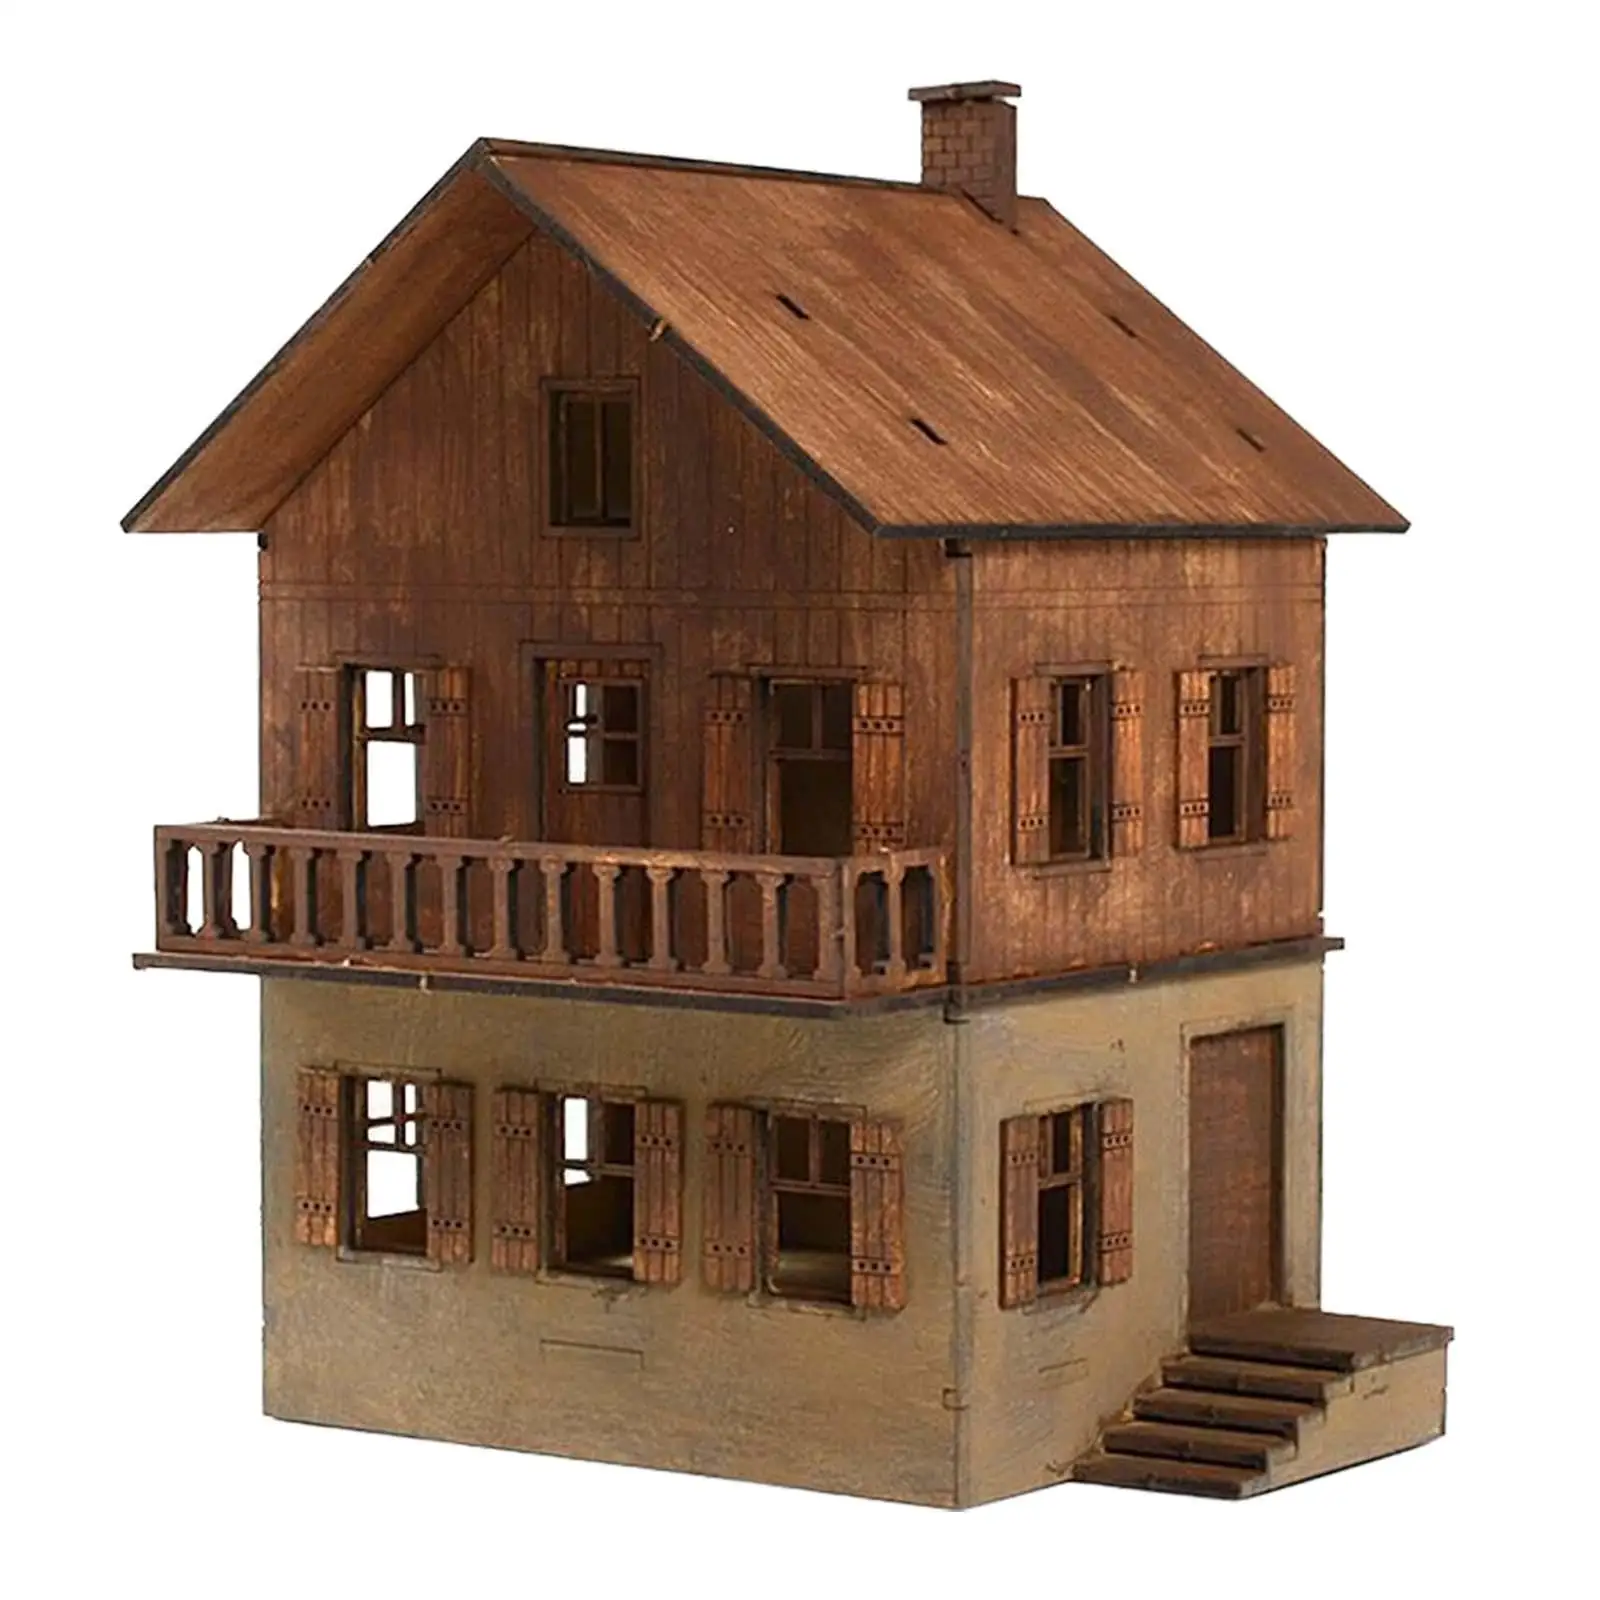 Wooden Model Kits House Handmade Wooden Puzzle Unpainted Buiilding Model Architecture Kits 1/72 Models House Sand Table Decor